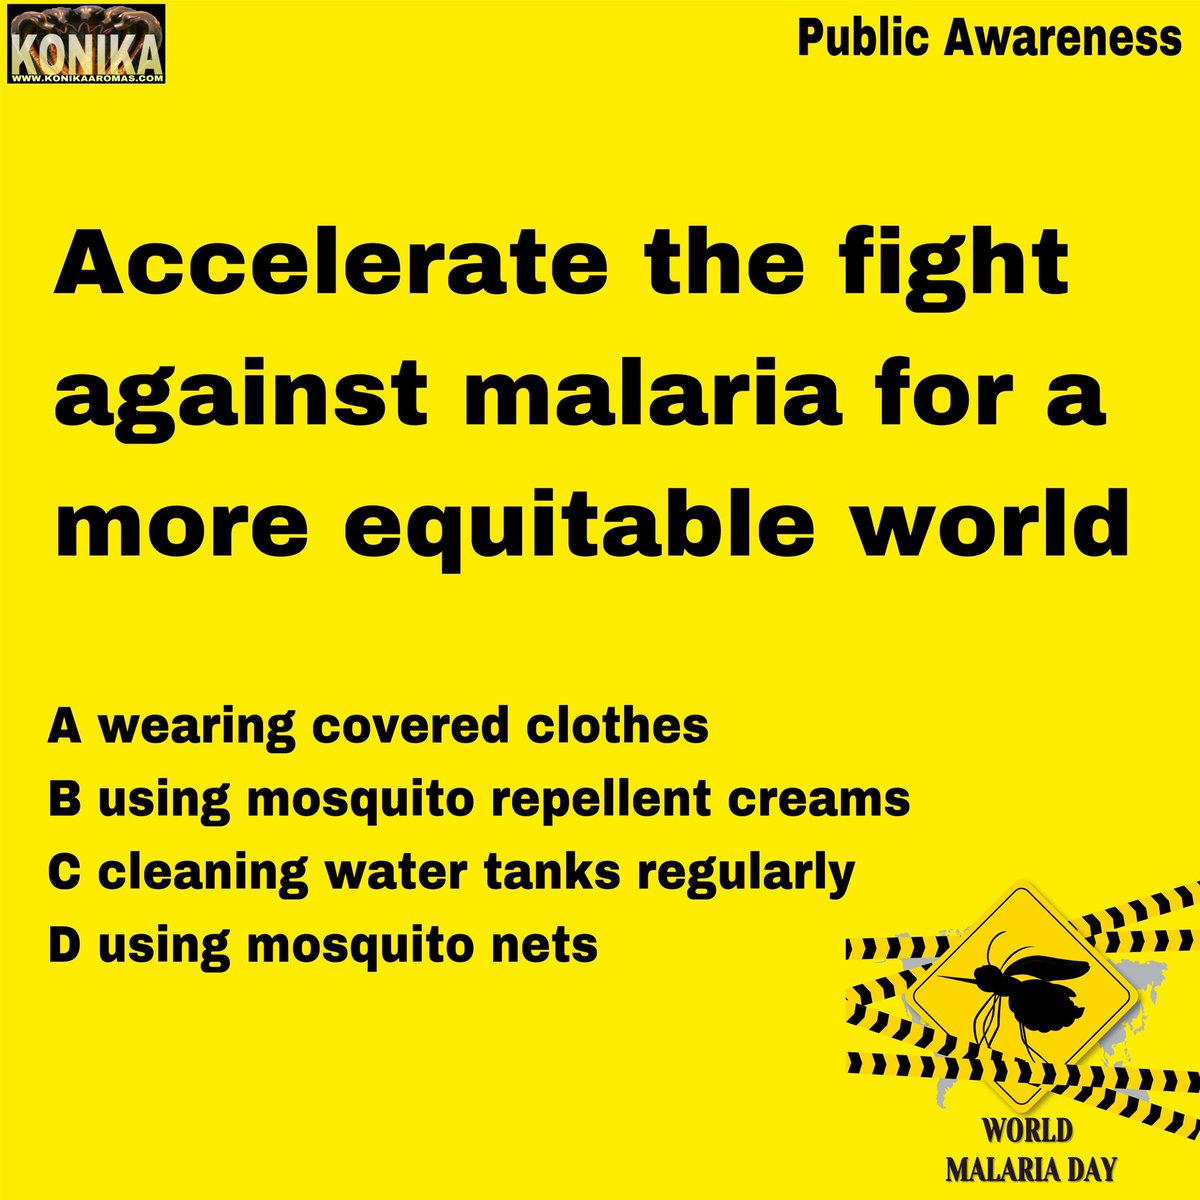 Let’s accelerate this fight to the conclusion.

Malaria is a life-threatening disease primarily found in tropical countries. It is both preventable and curable.
#who #health #worldmalariaday #worldhealthorganisation #konika #mosquitoes